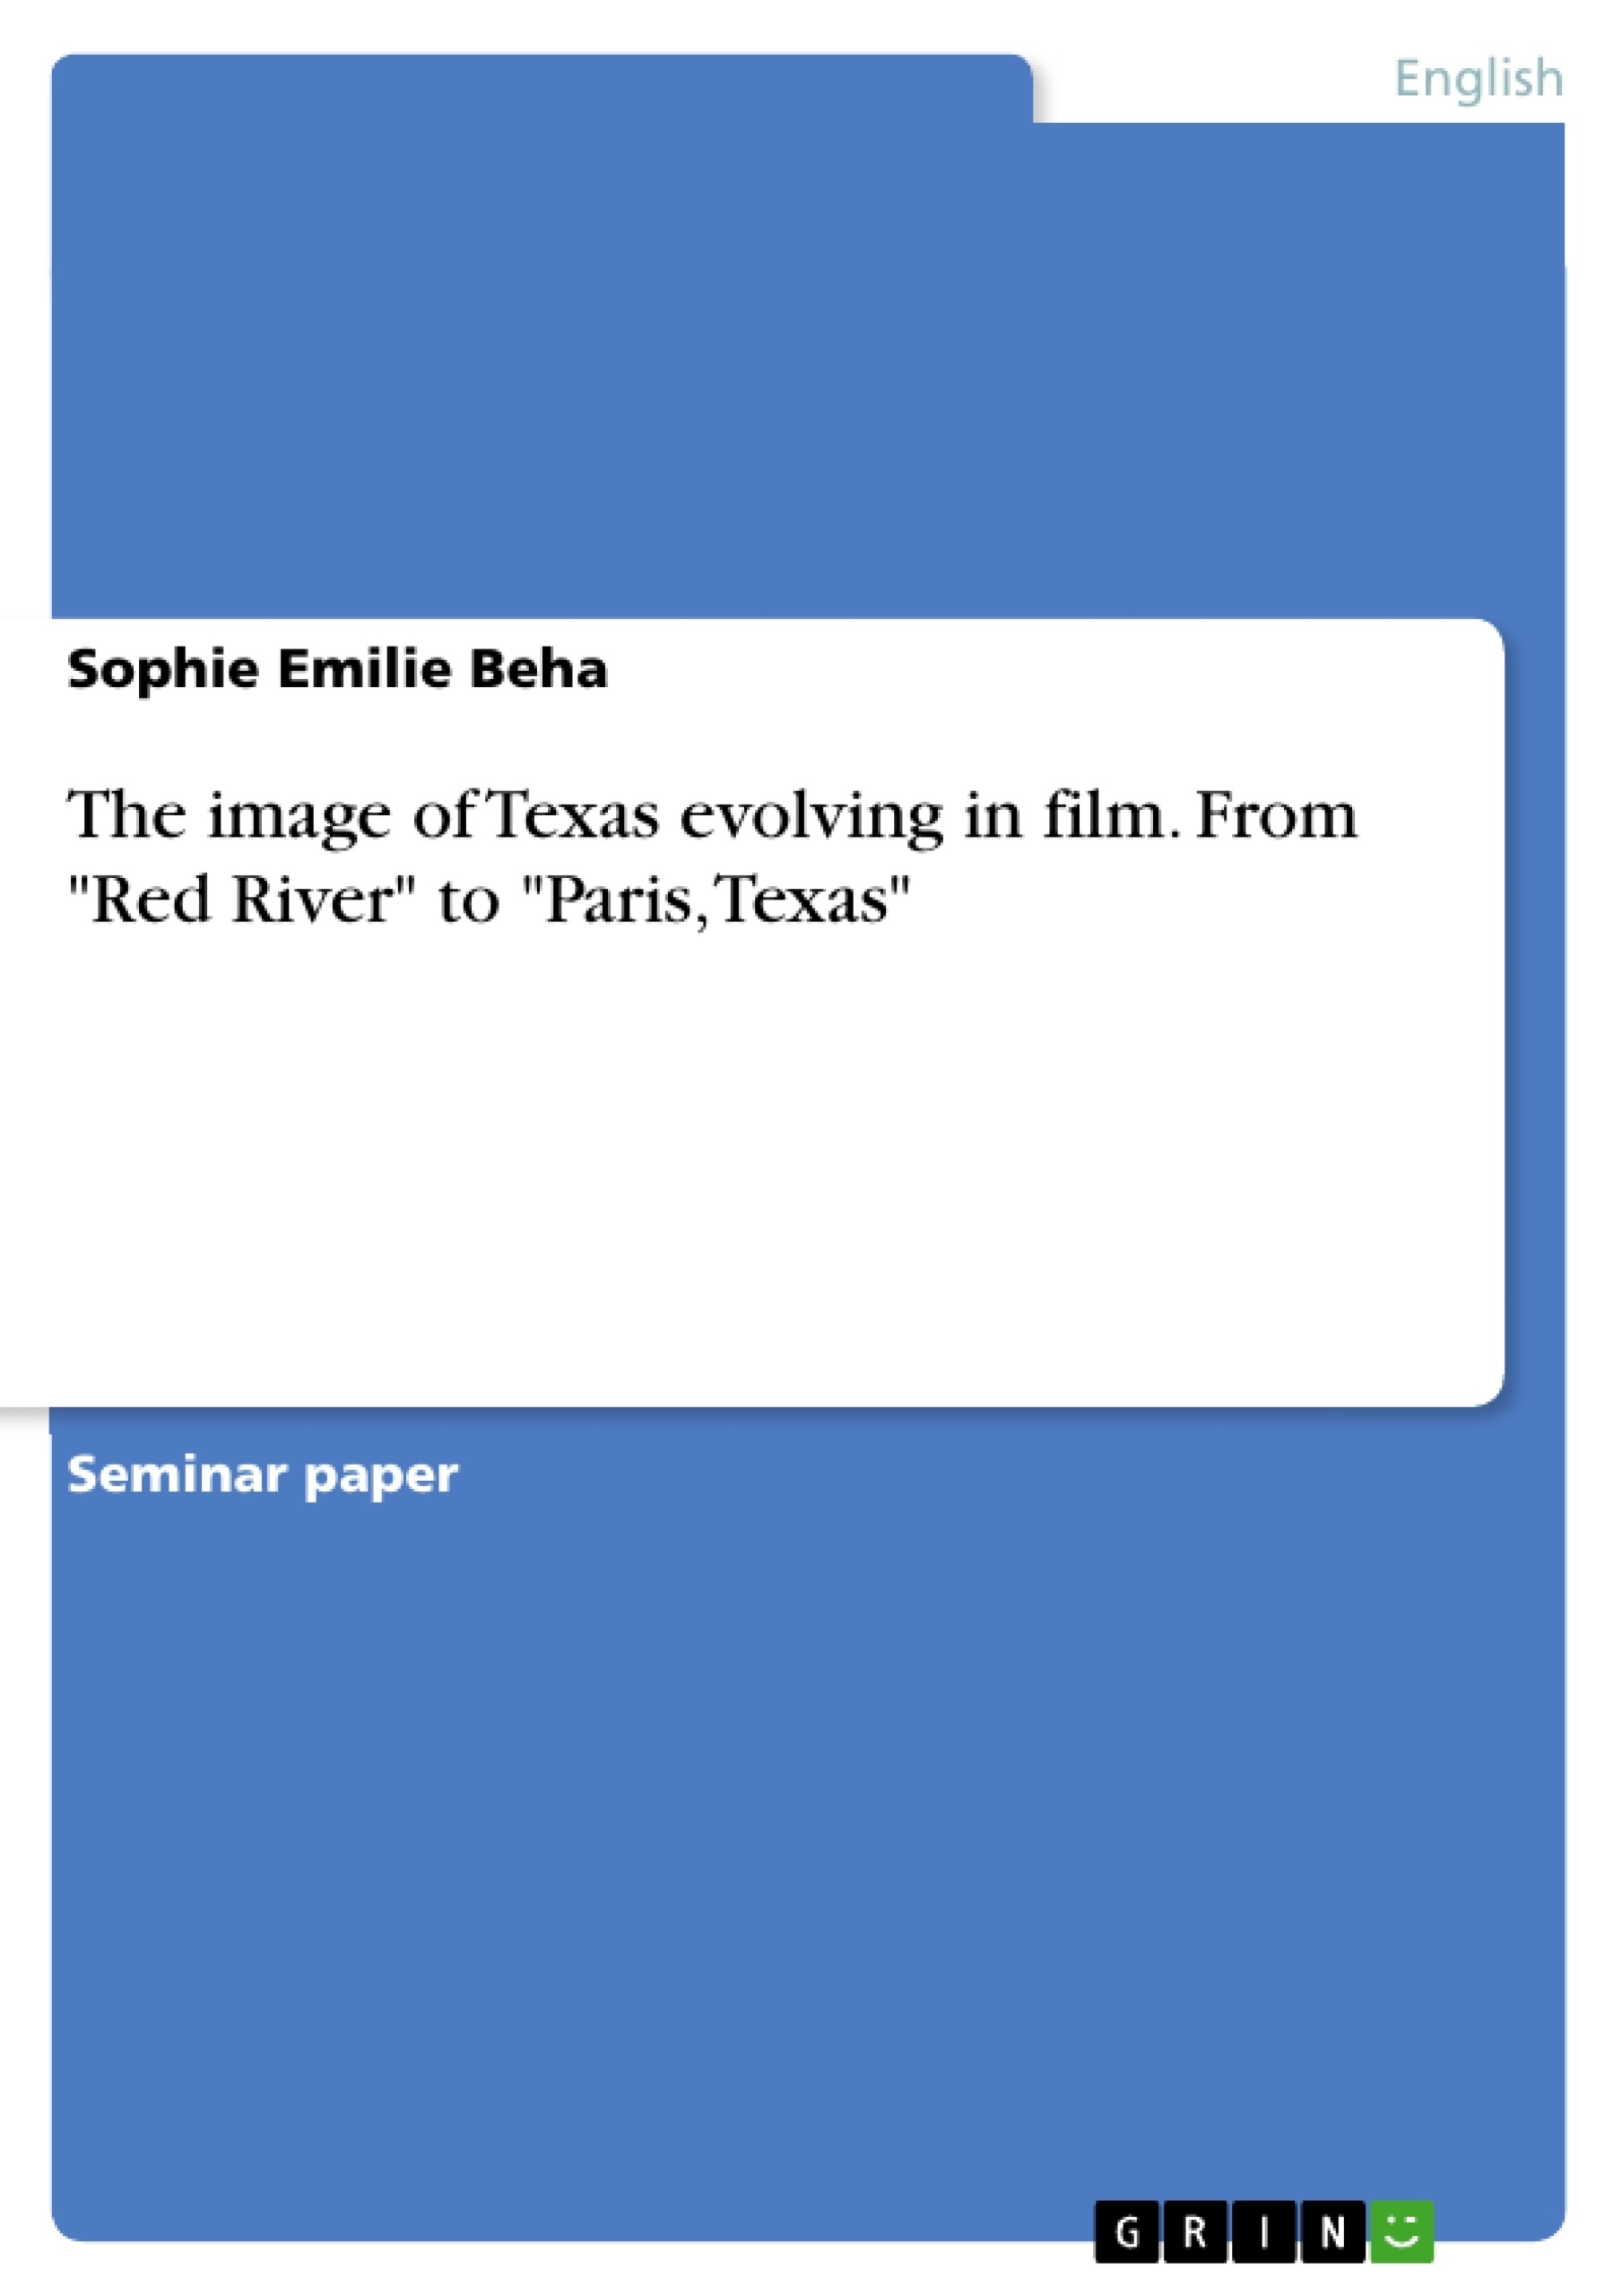 Title: The image of Texas evolving in film. From "Red River" to "Paris, Texas"